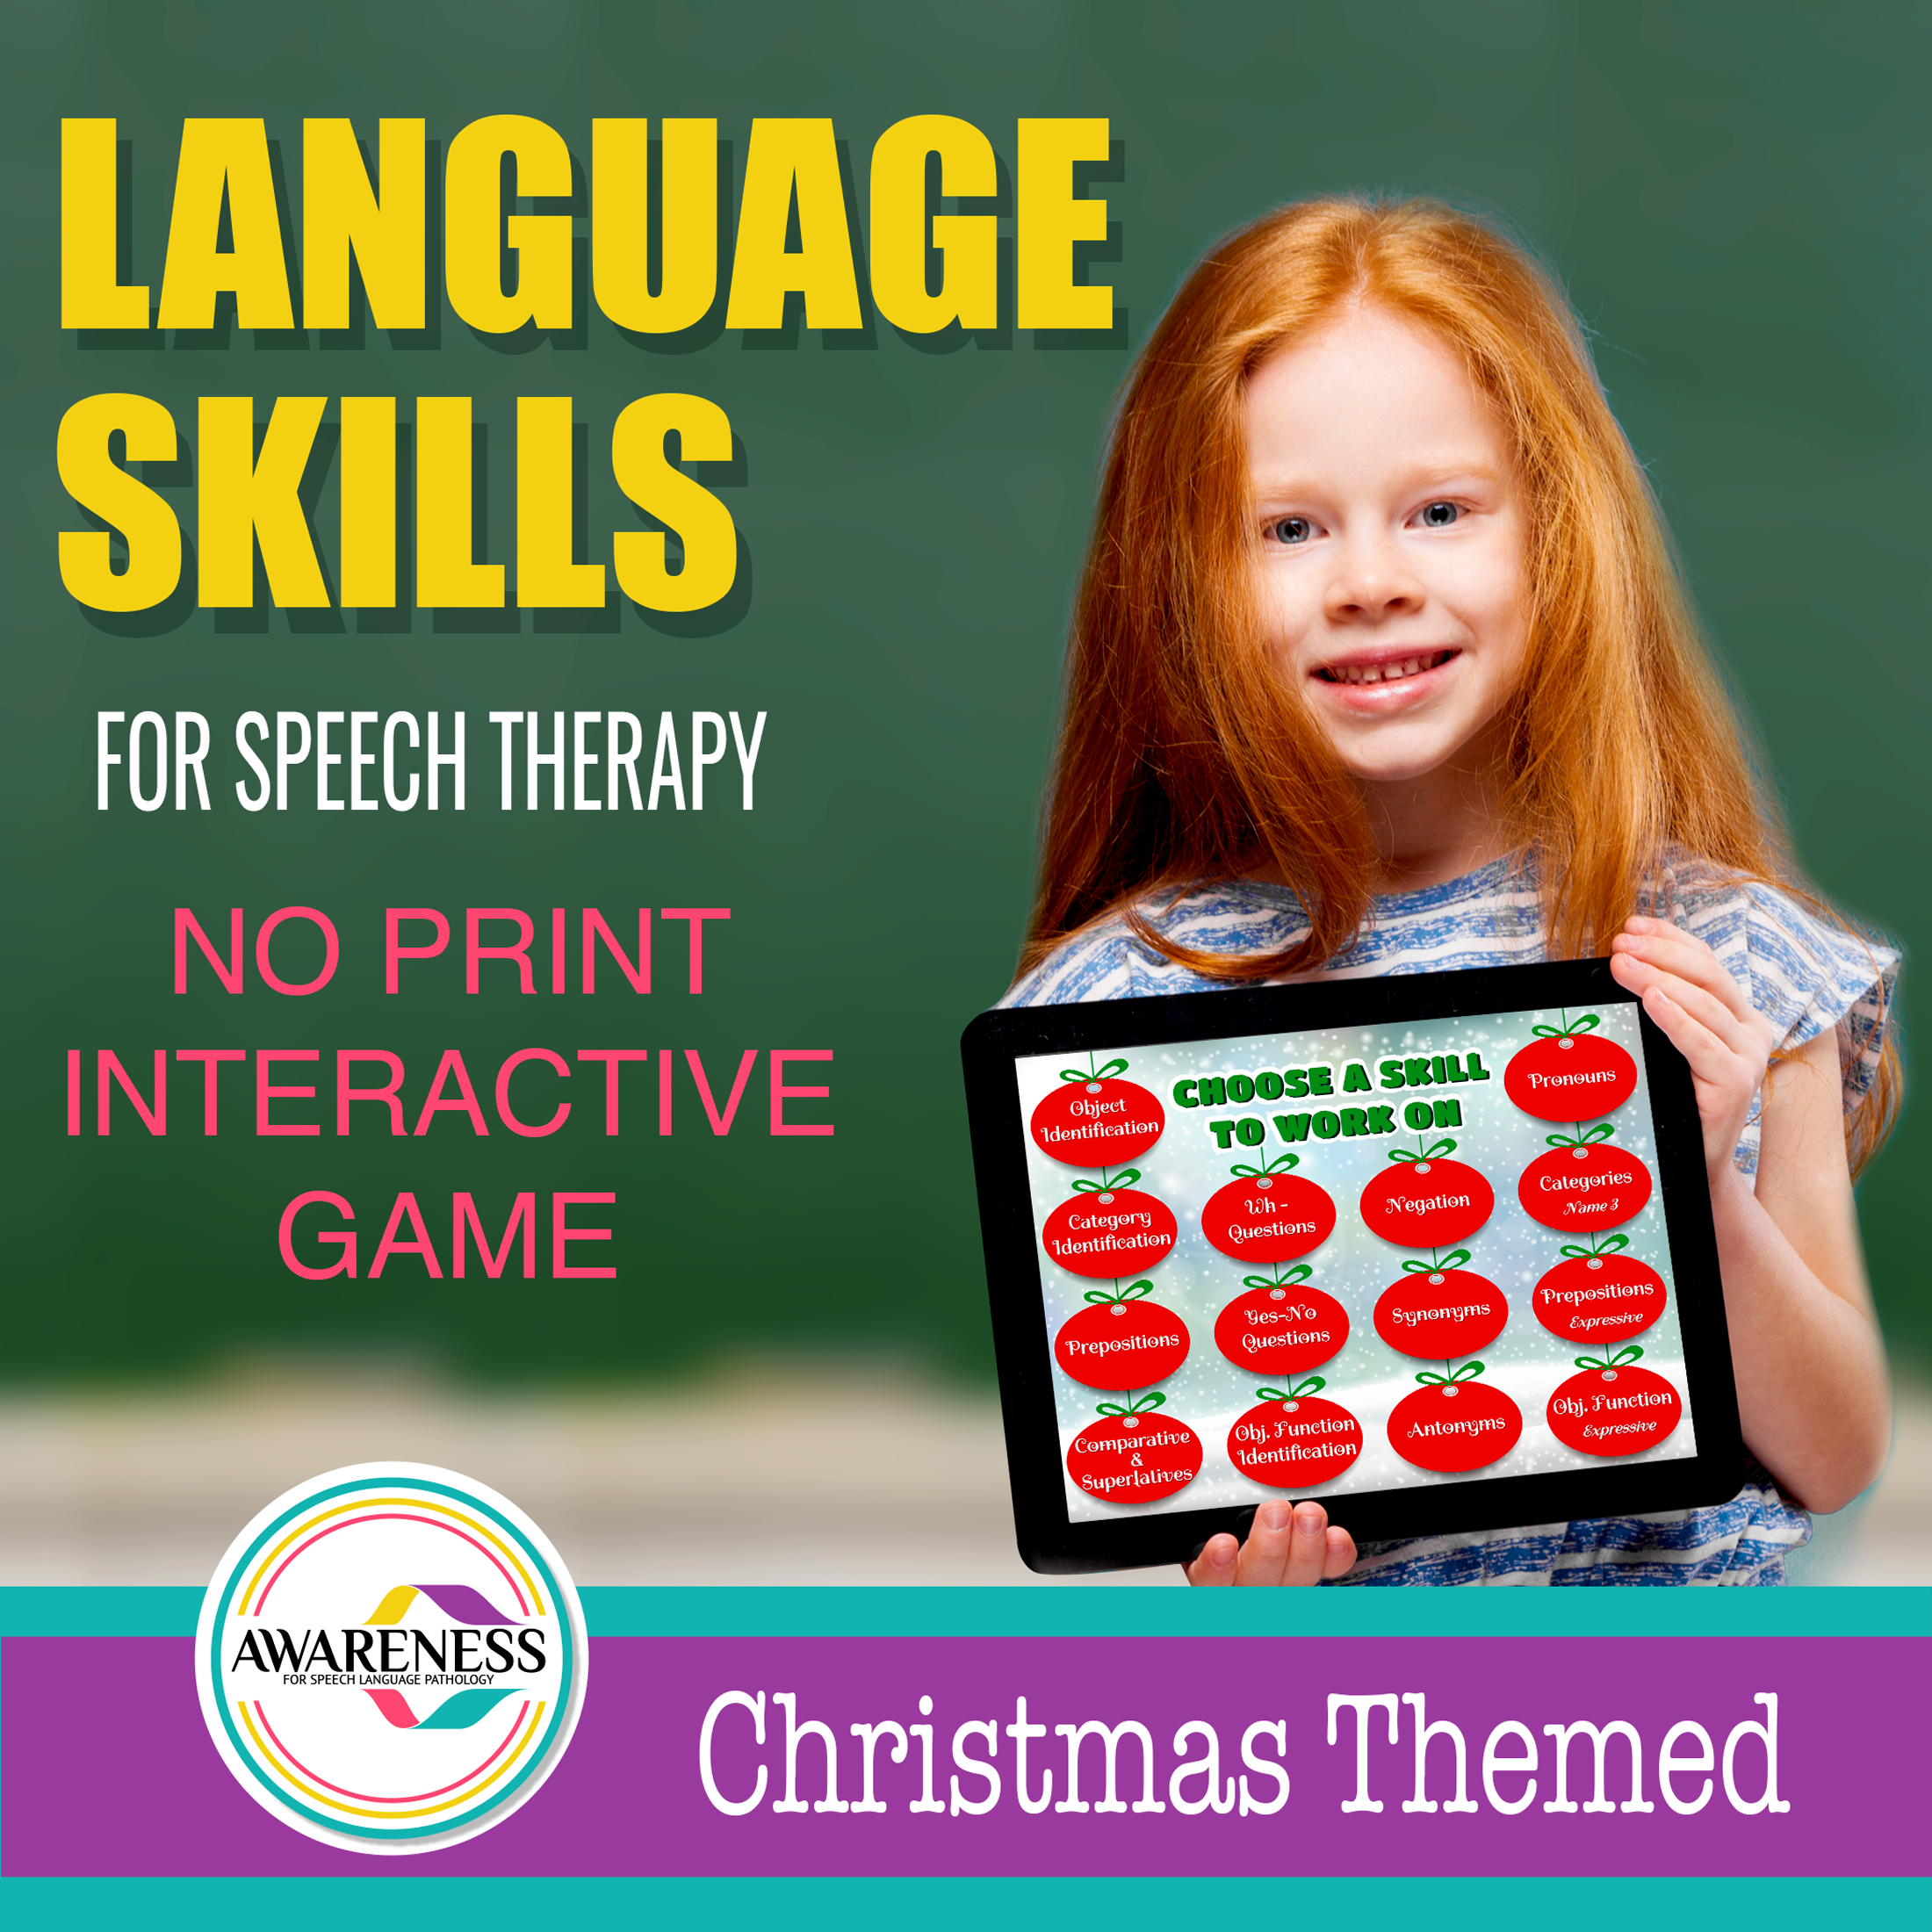 Language Skills for Speech Therapy is a No Print ...